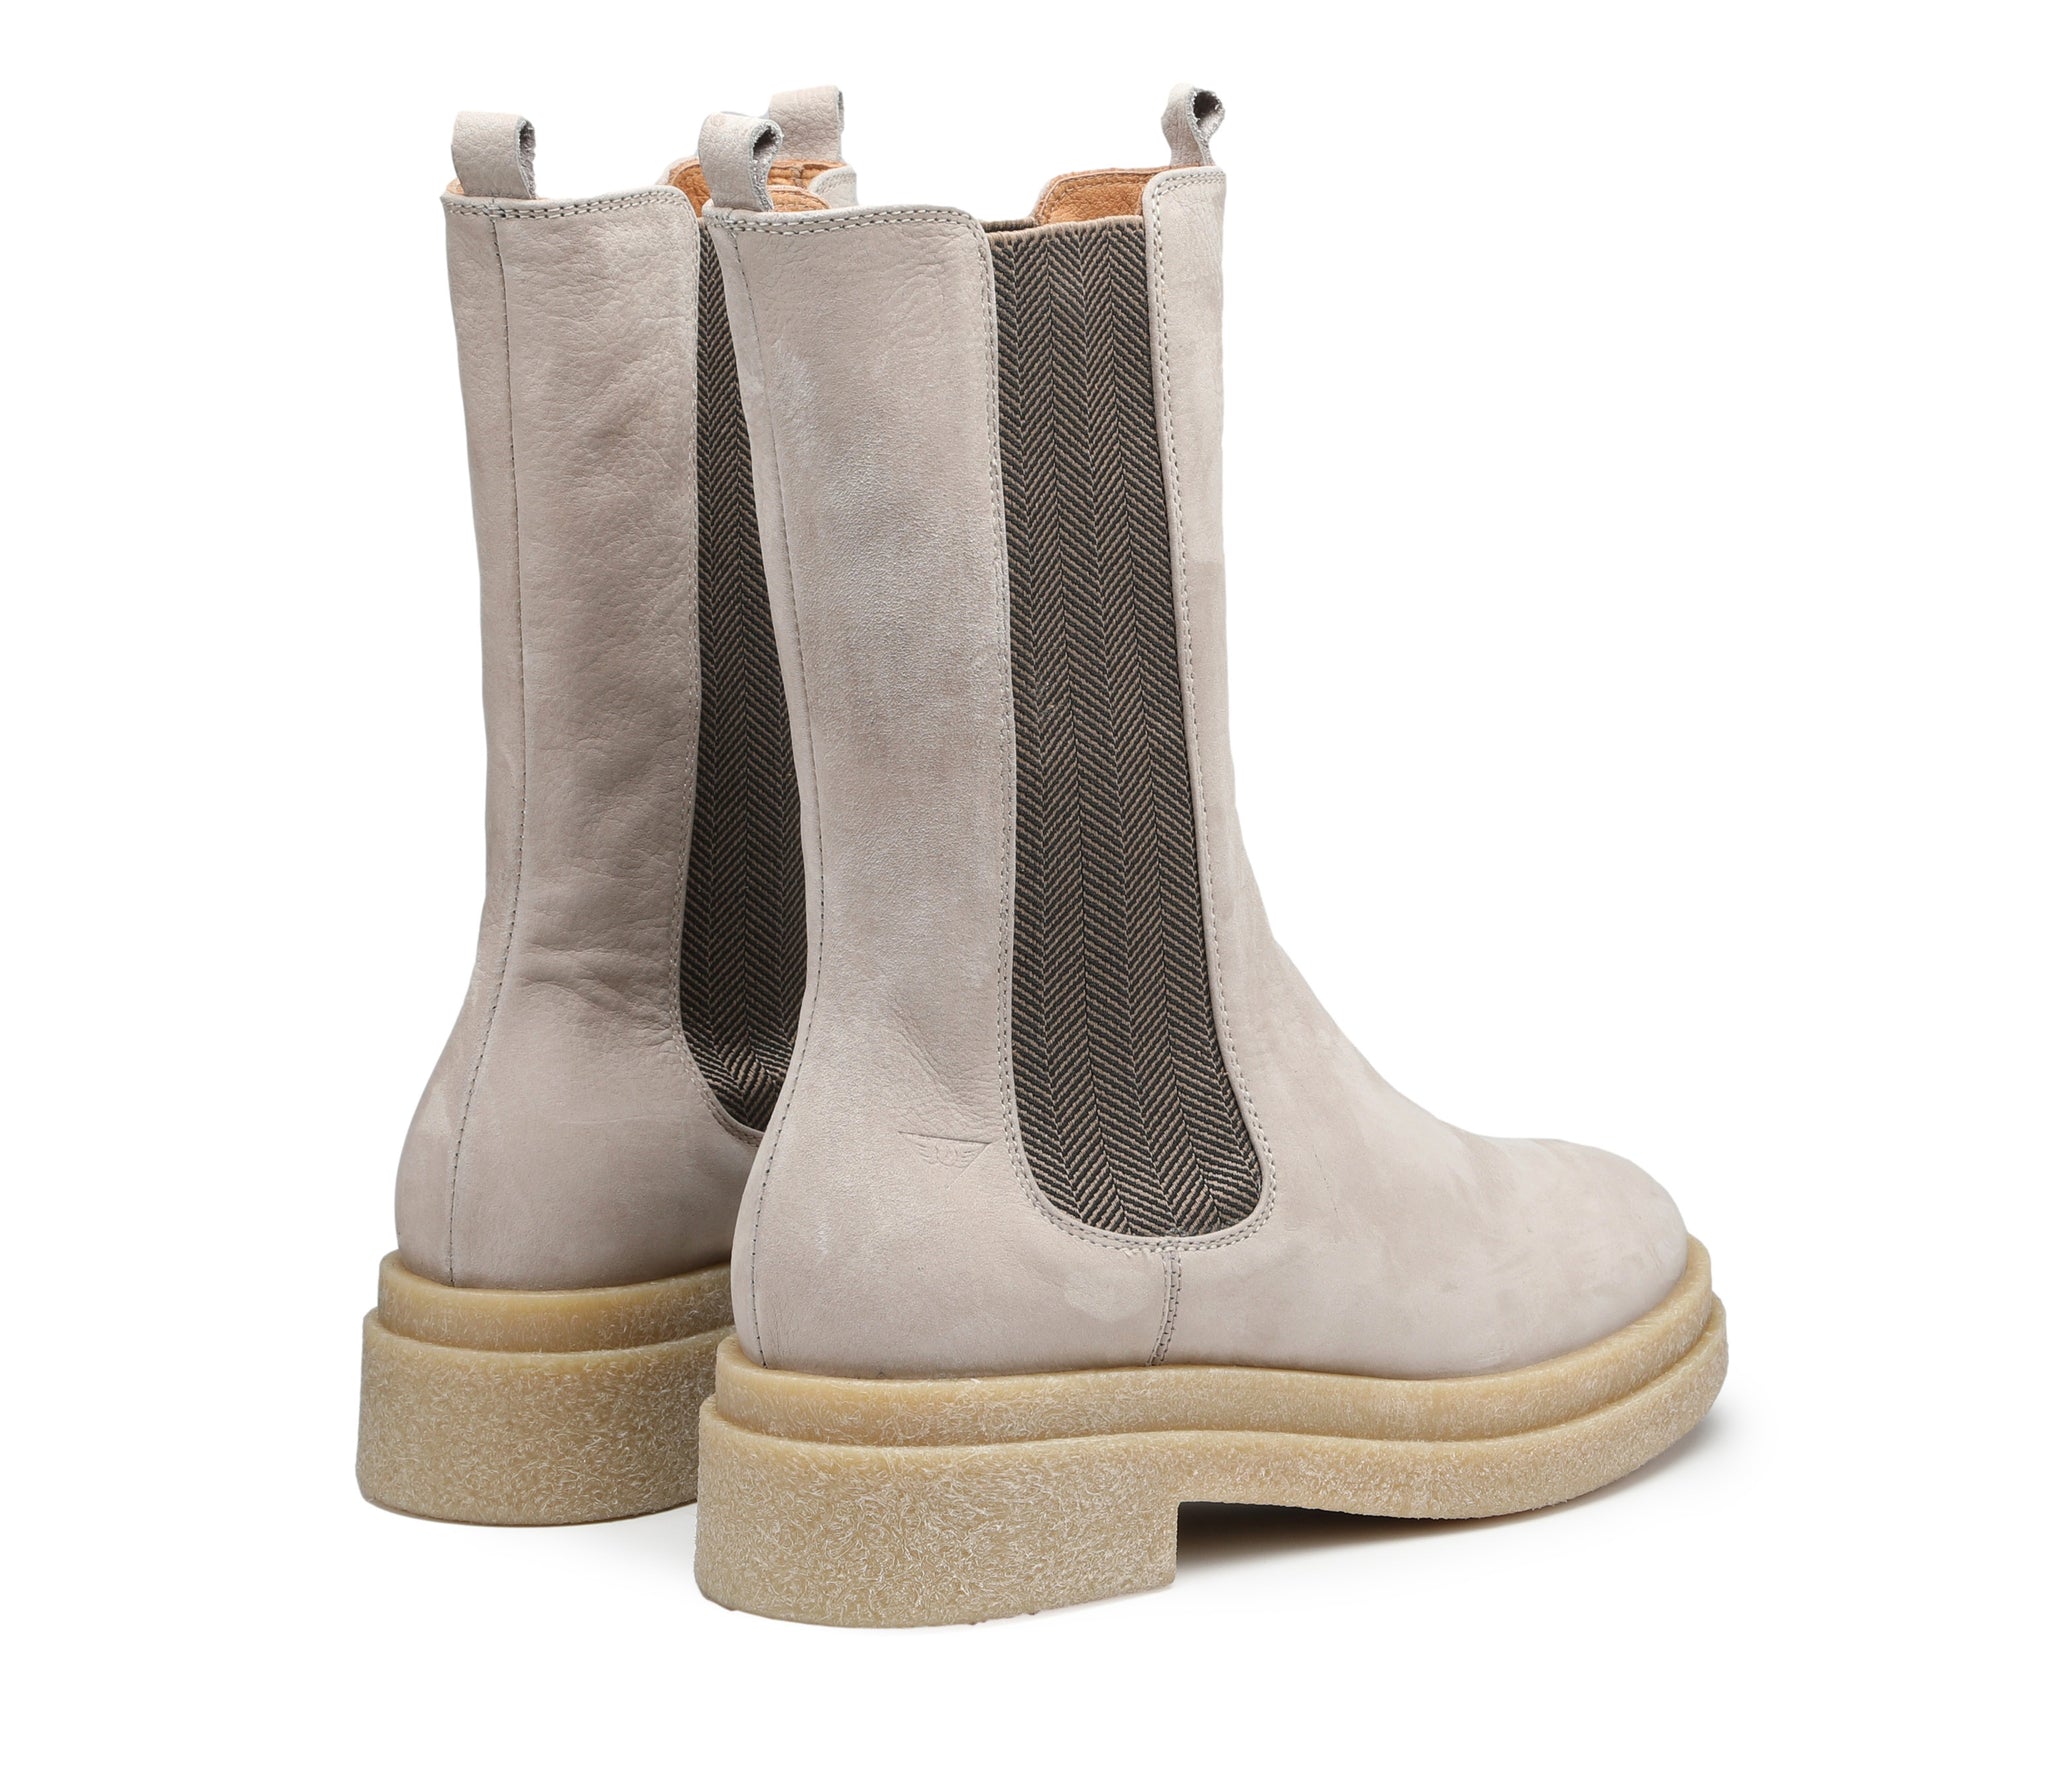 Women's Boots in Ice-Colored Nubuck with Rubber Sole